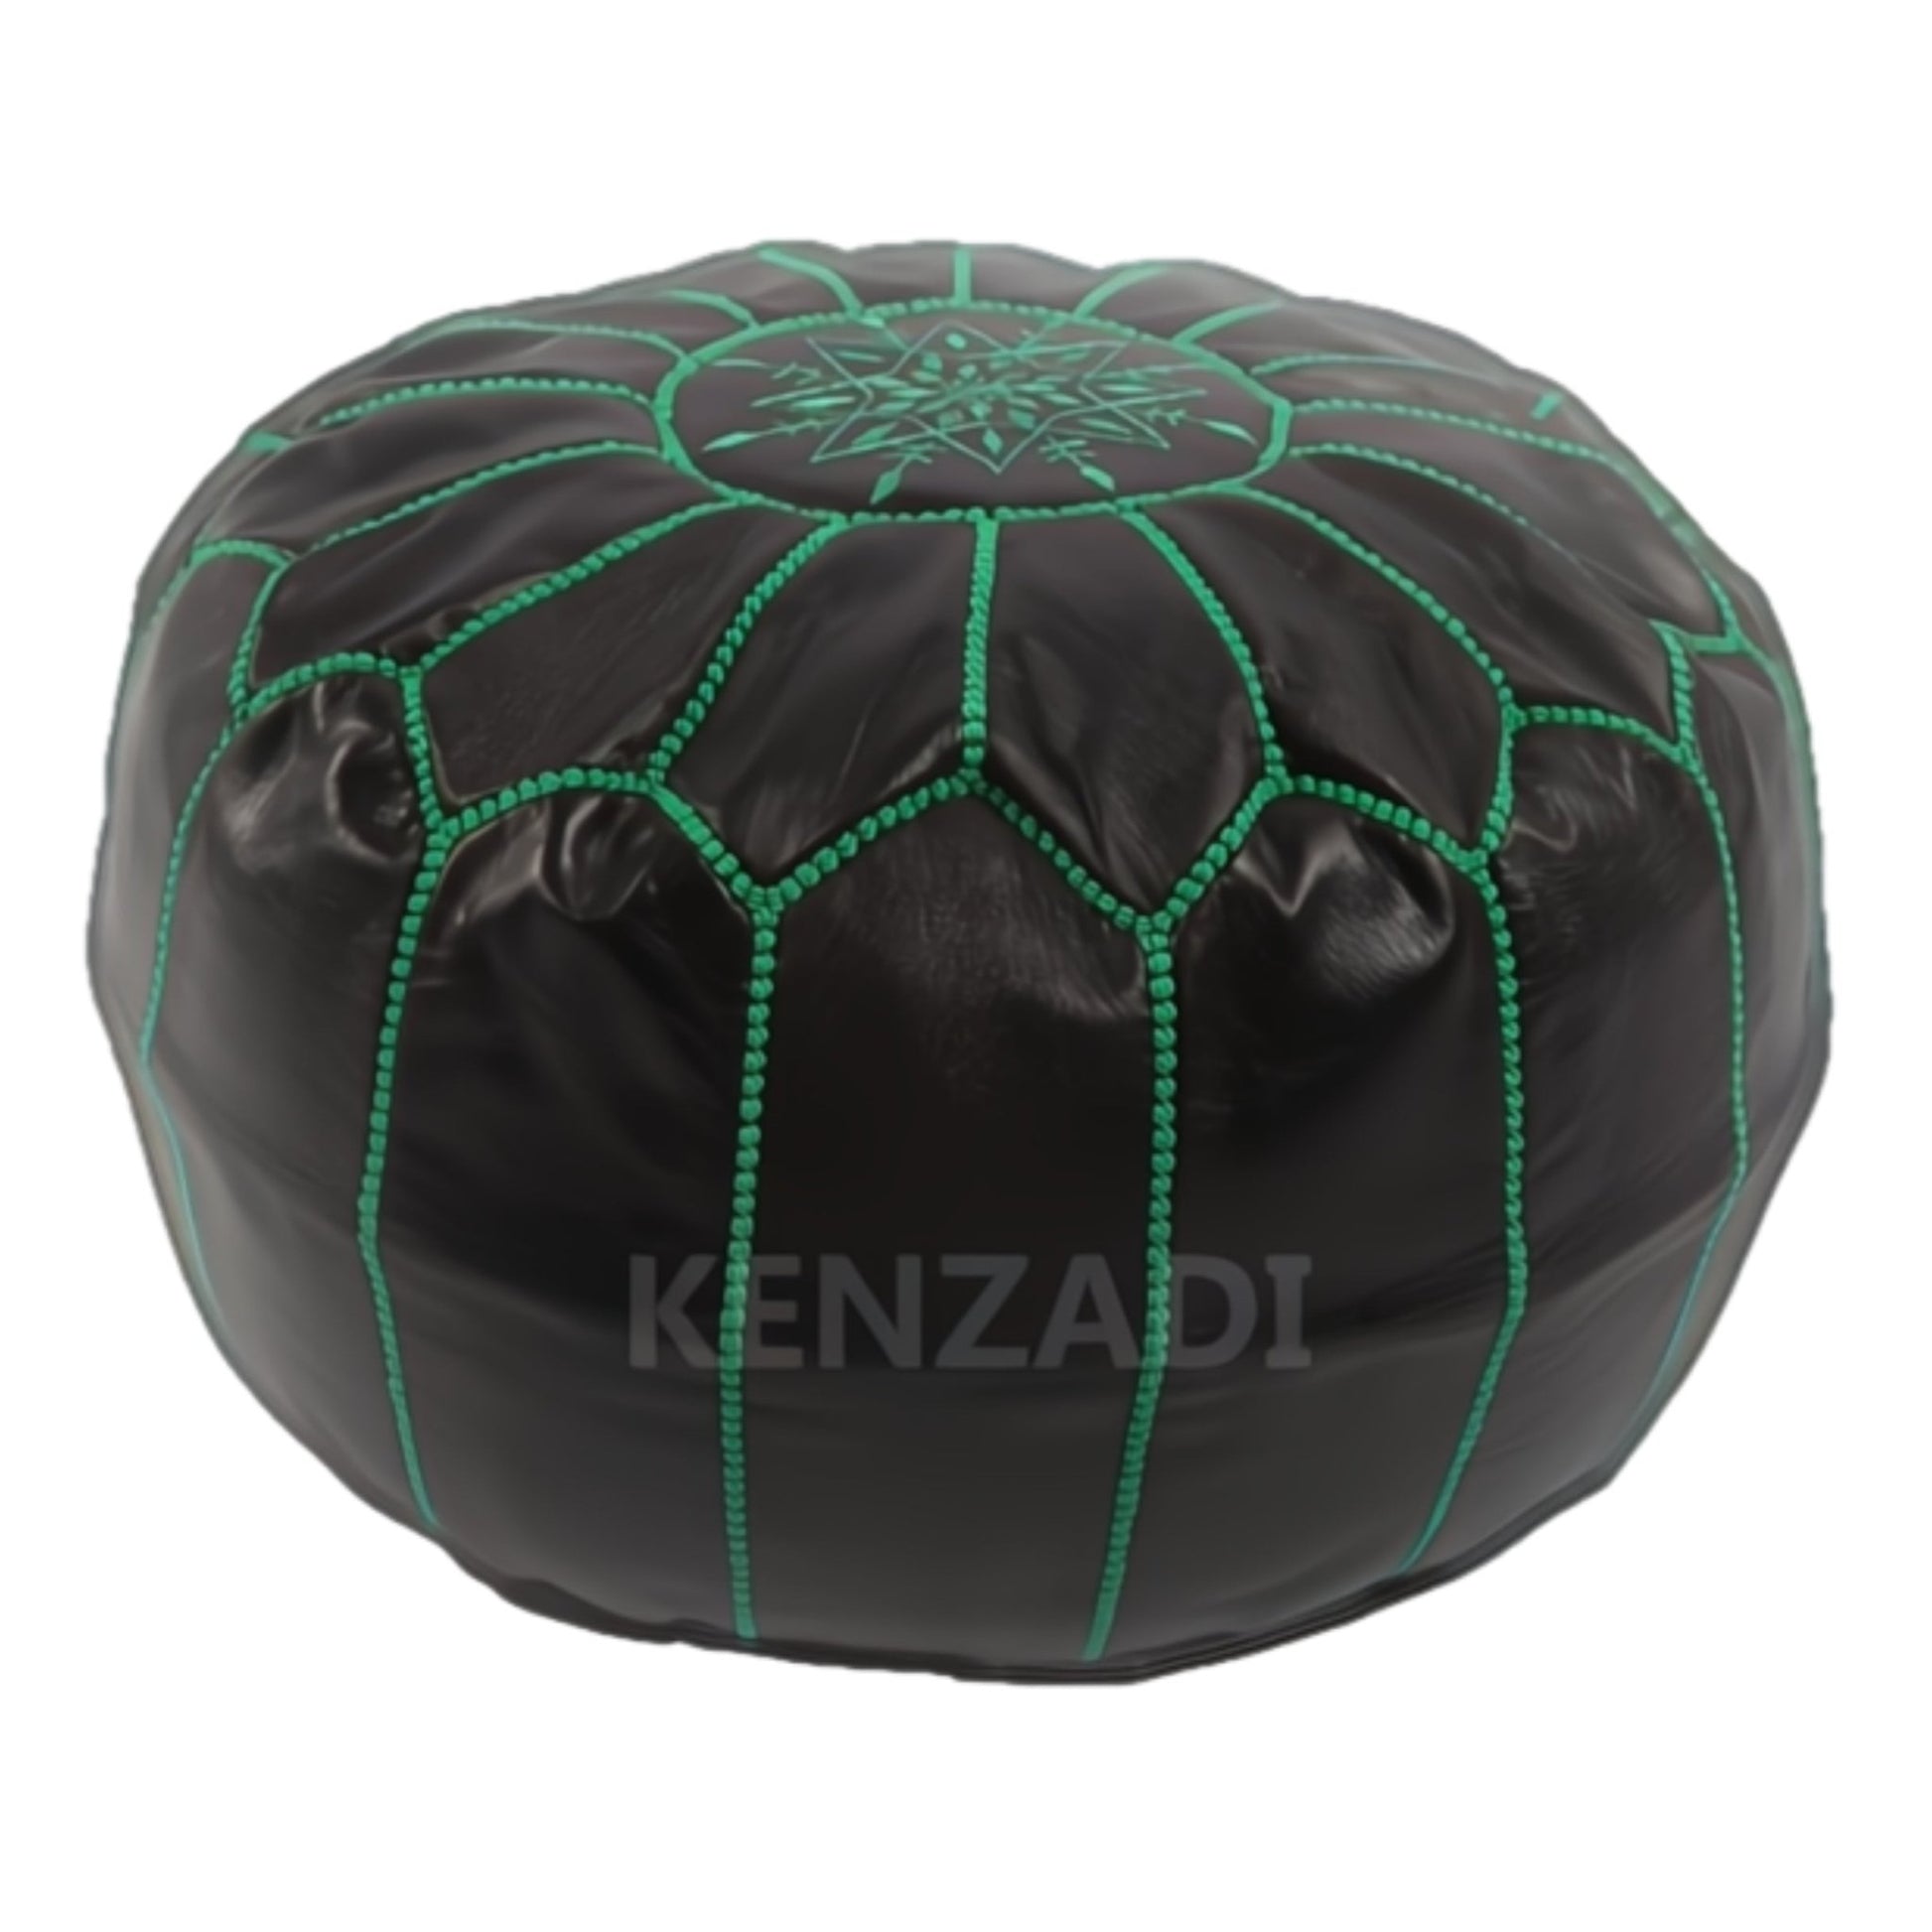 Moroccan leather pouf, round pouf, berber pouf, Black with Green embroidery by Kenzadi - Handmade by My Poufs